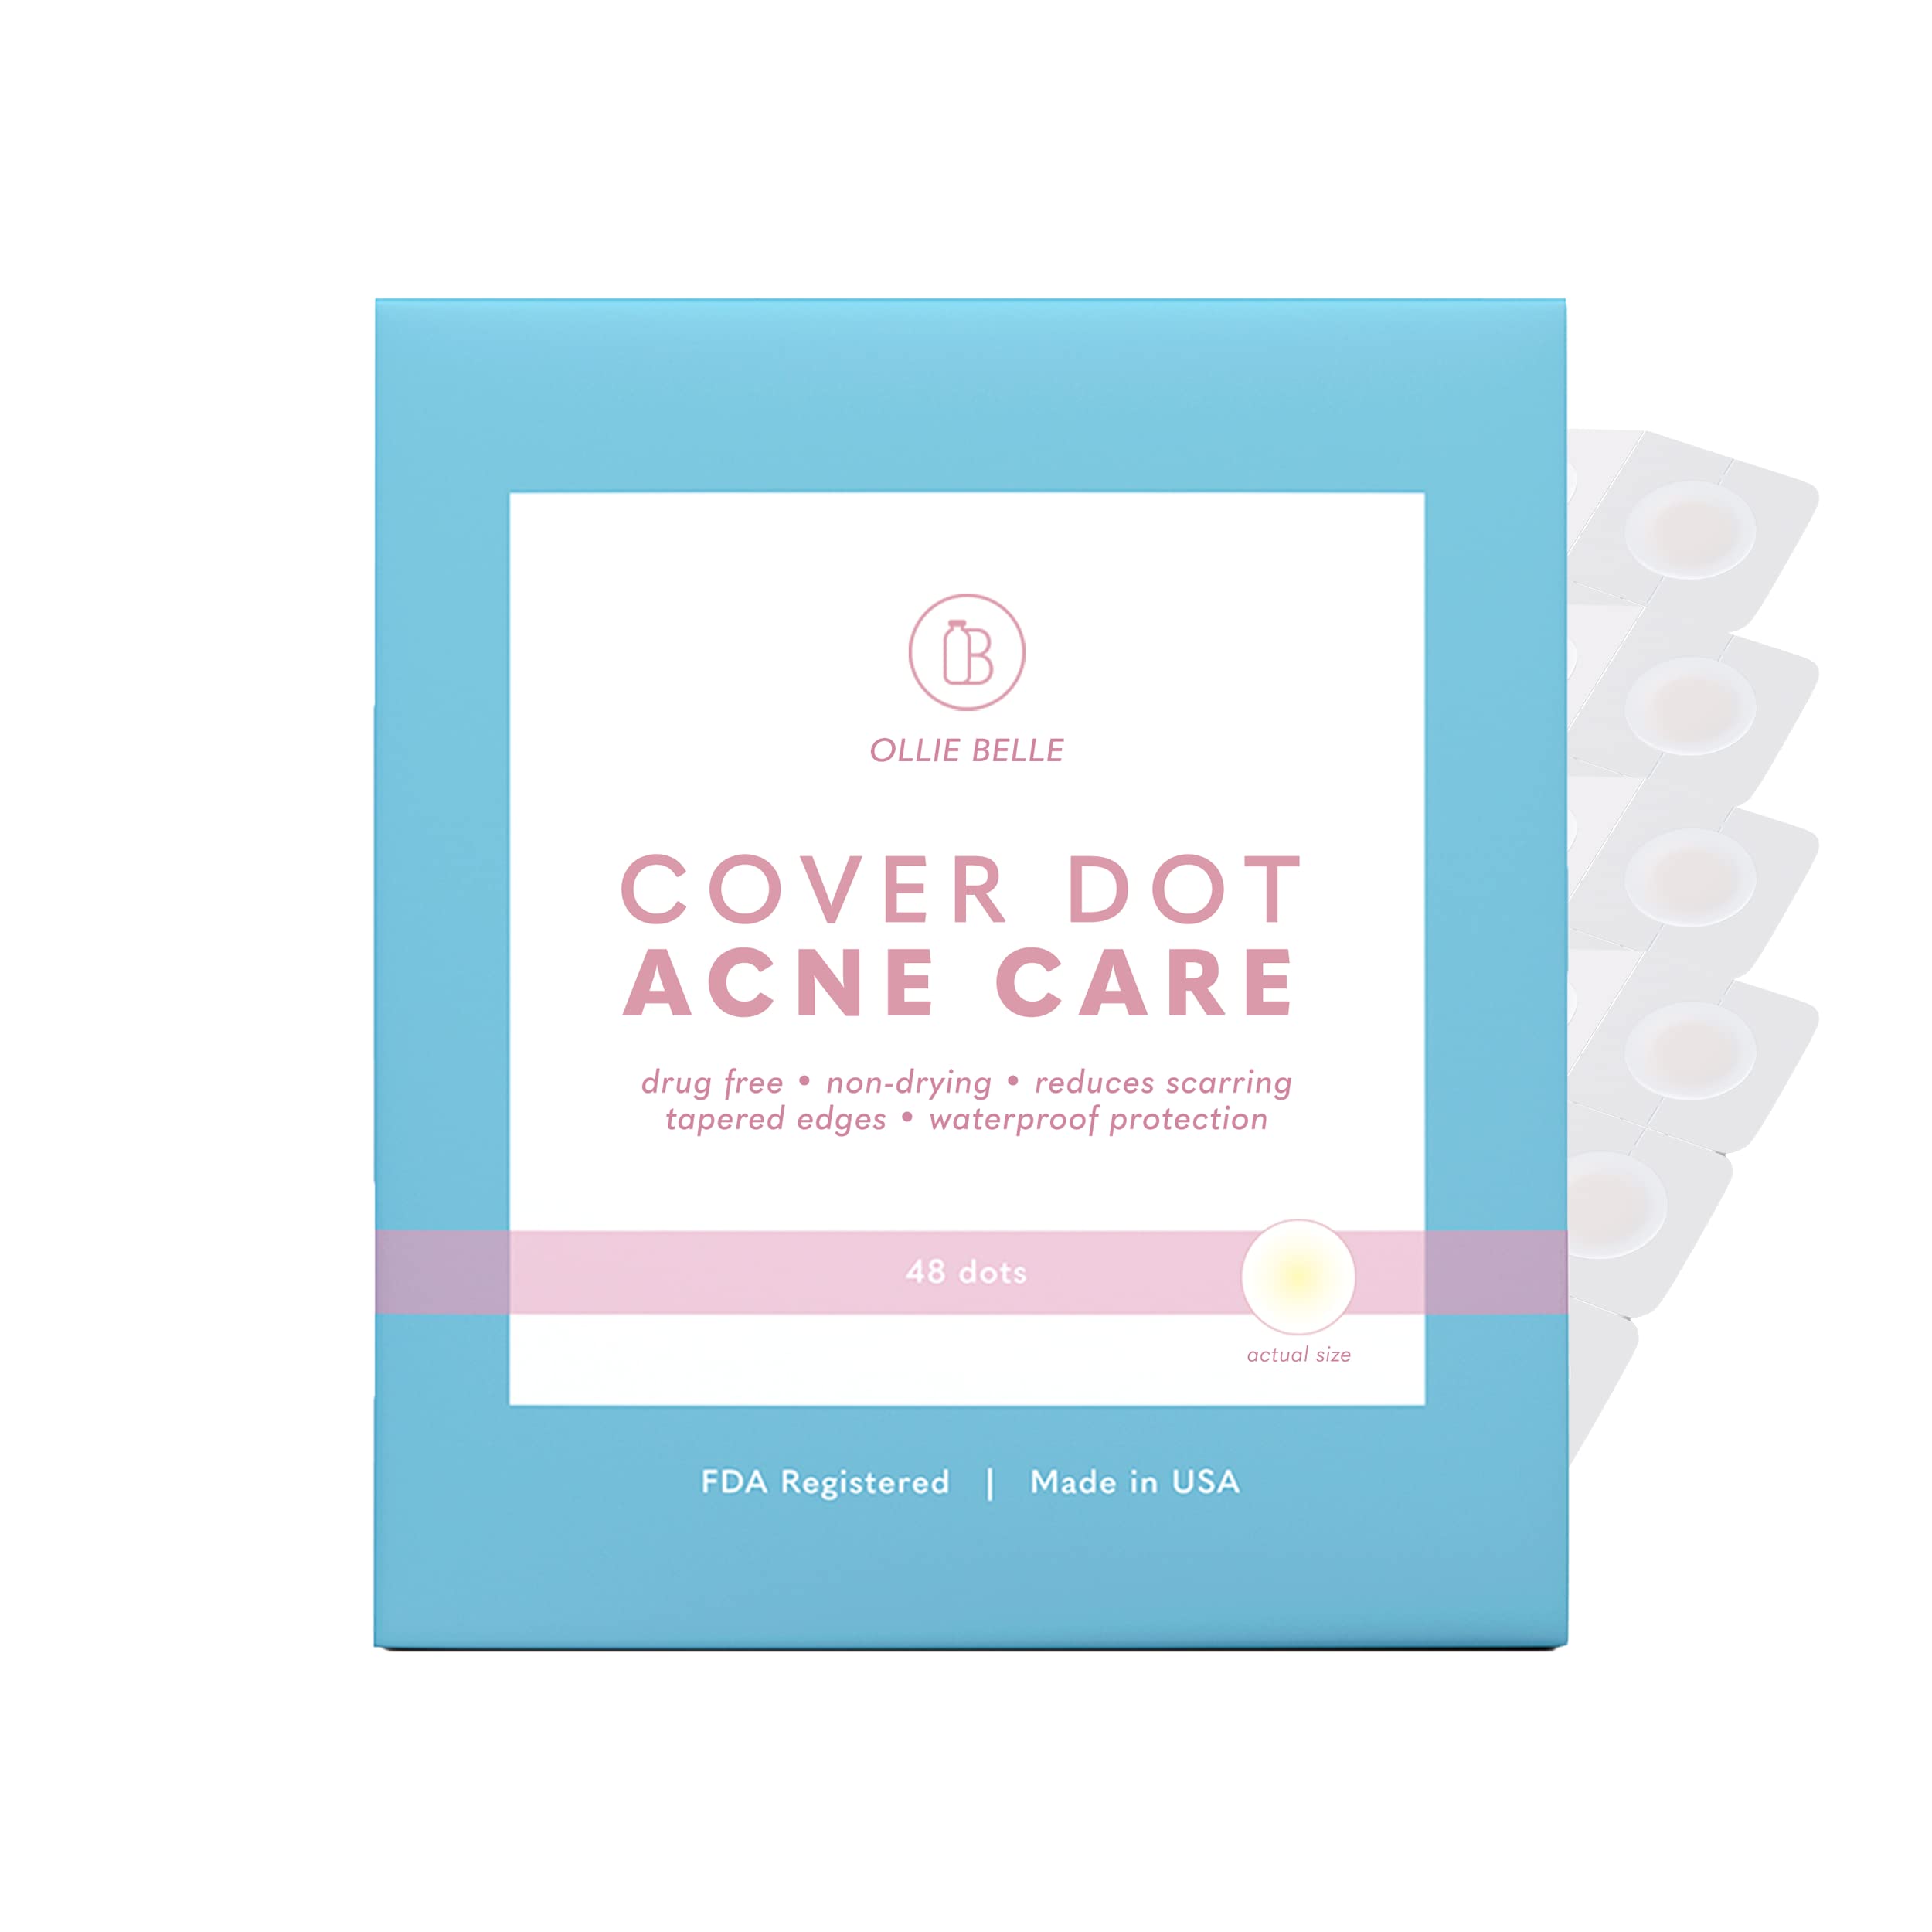 Book Cover SMARTMED Cover Dot Acne Care (48 dots) Skin Blemish Treatment with Hydrocolloid | Clear, Waterproof Patch | Oil and Pimple Absorbing 48 Count (Pack of 1)